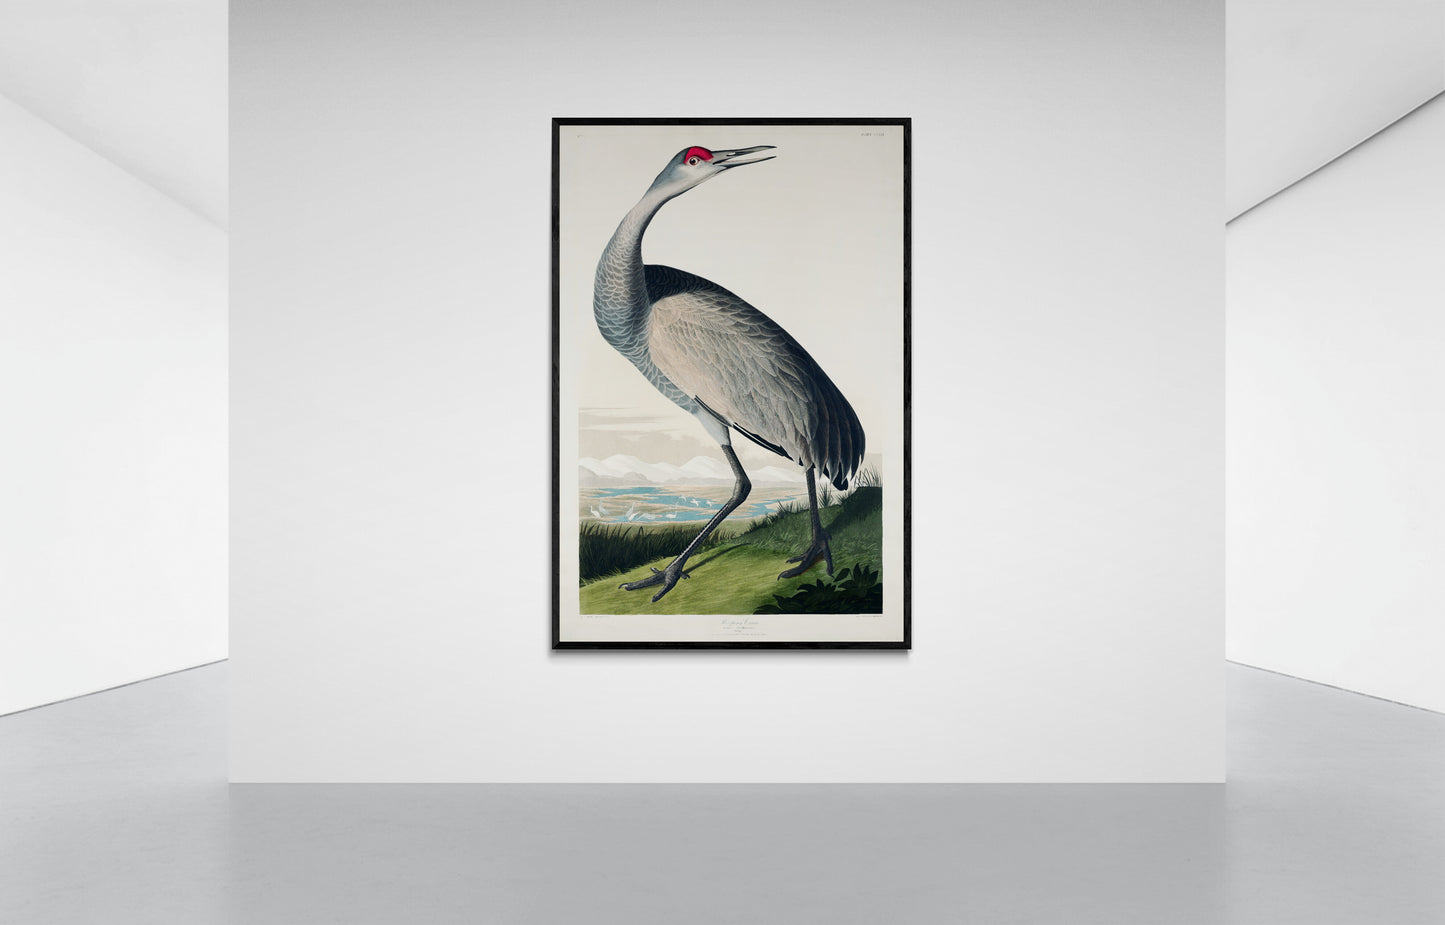 Vintage naturalistic bird illustrations: Hooping Crane. Prints on art paper, canvas, and framed canvas. Free shipping in the USA. SKUJJA071